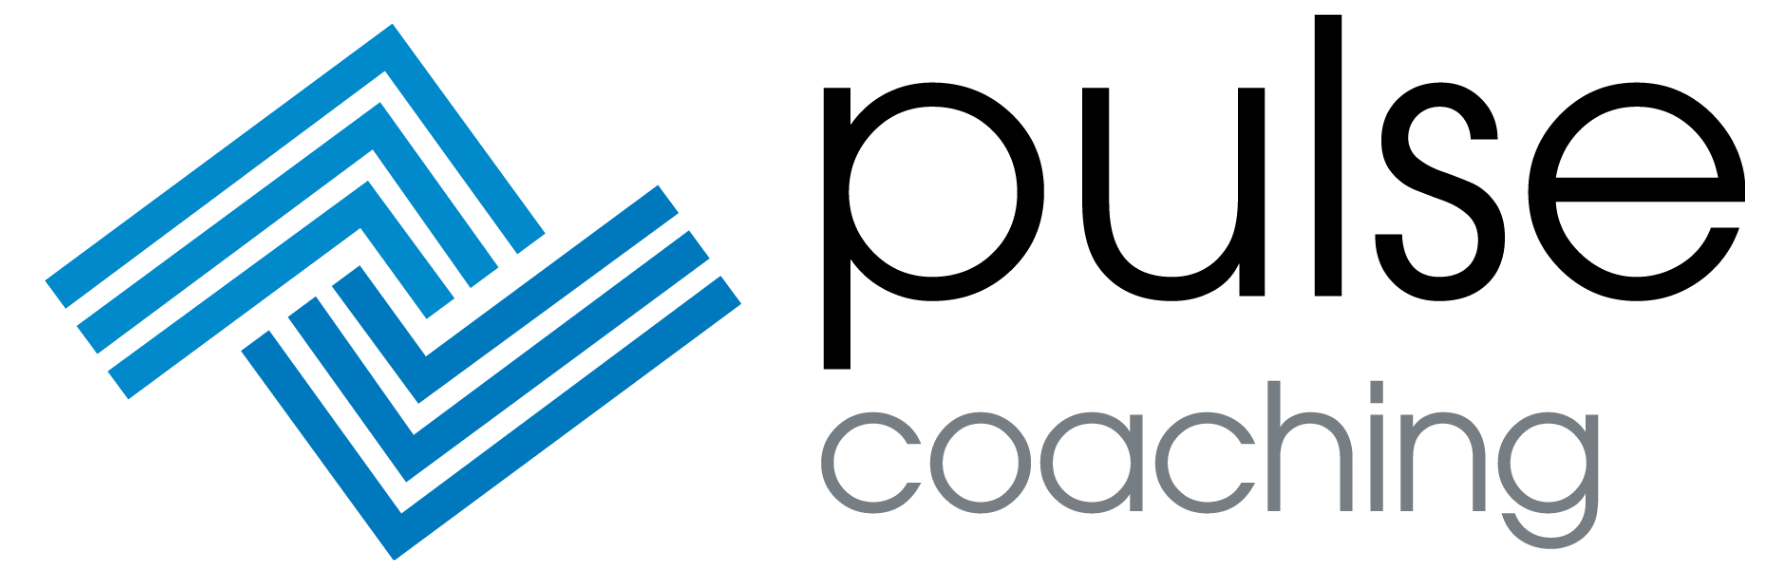 Sales Coaching and Training